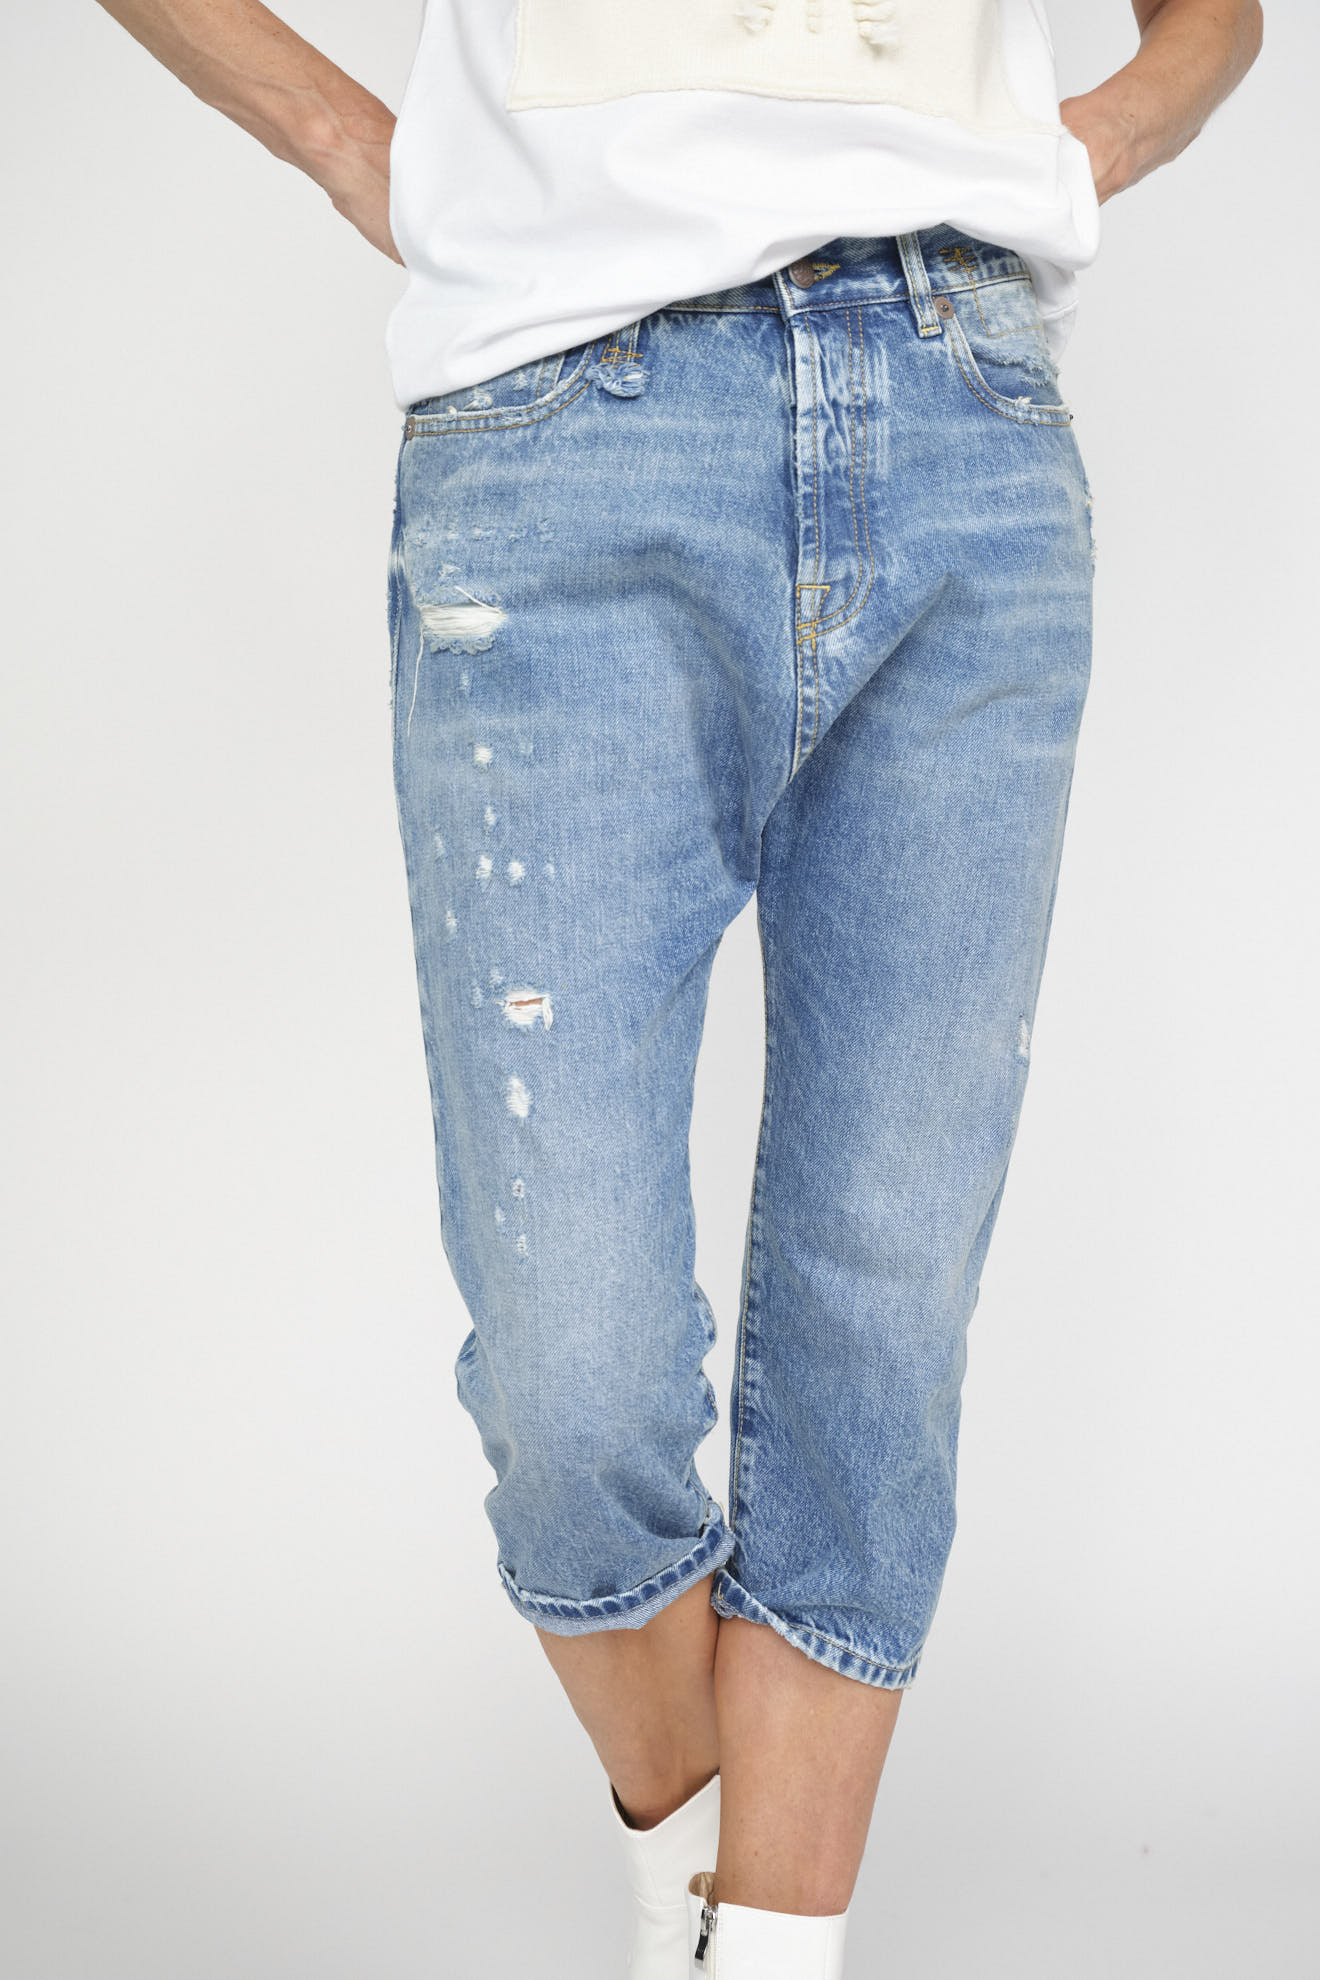 R13 Tailored Drop Jeans blue 25